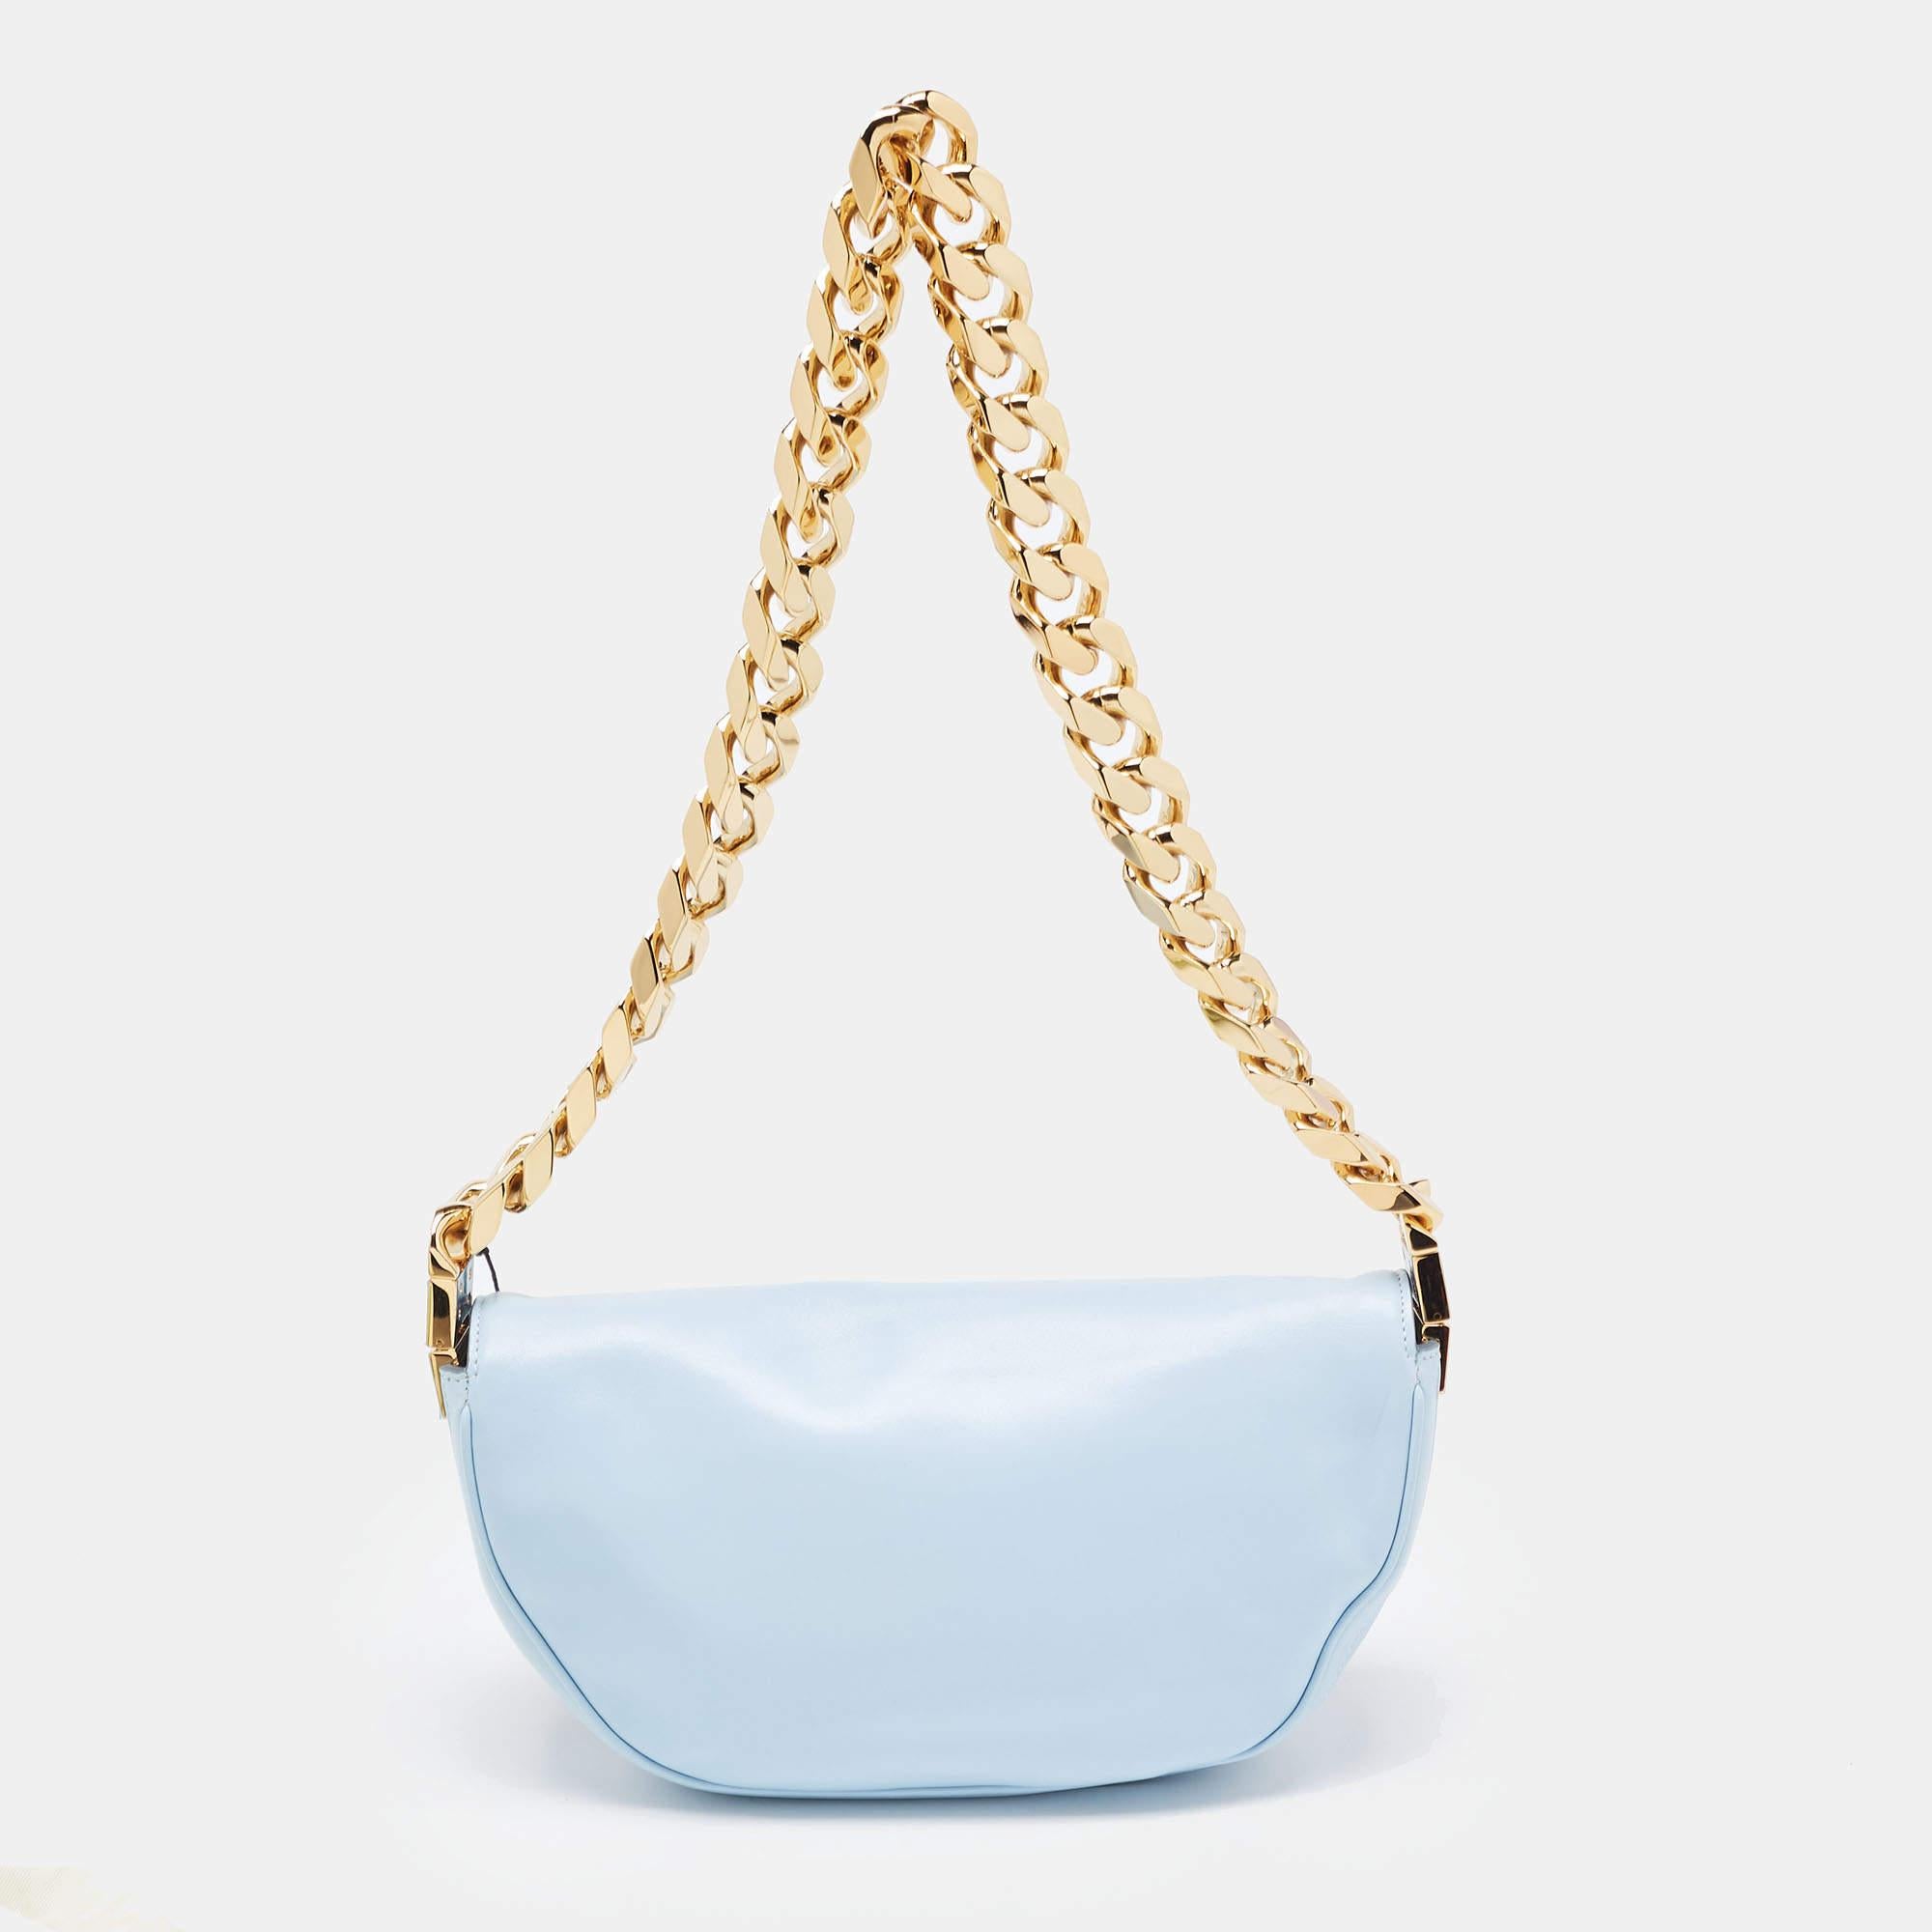 Indulge in luxury with this Burberry pale blue bag. Meticulously crafted from premium materials, it combines exquisite design, impeccable craftsmanship, and timeless elegance. Elevate your style with this fashion accessory.

Includes: Original